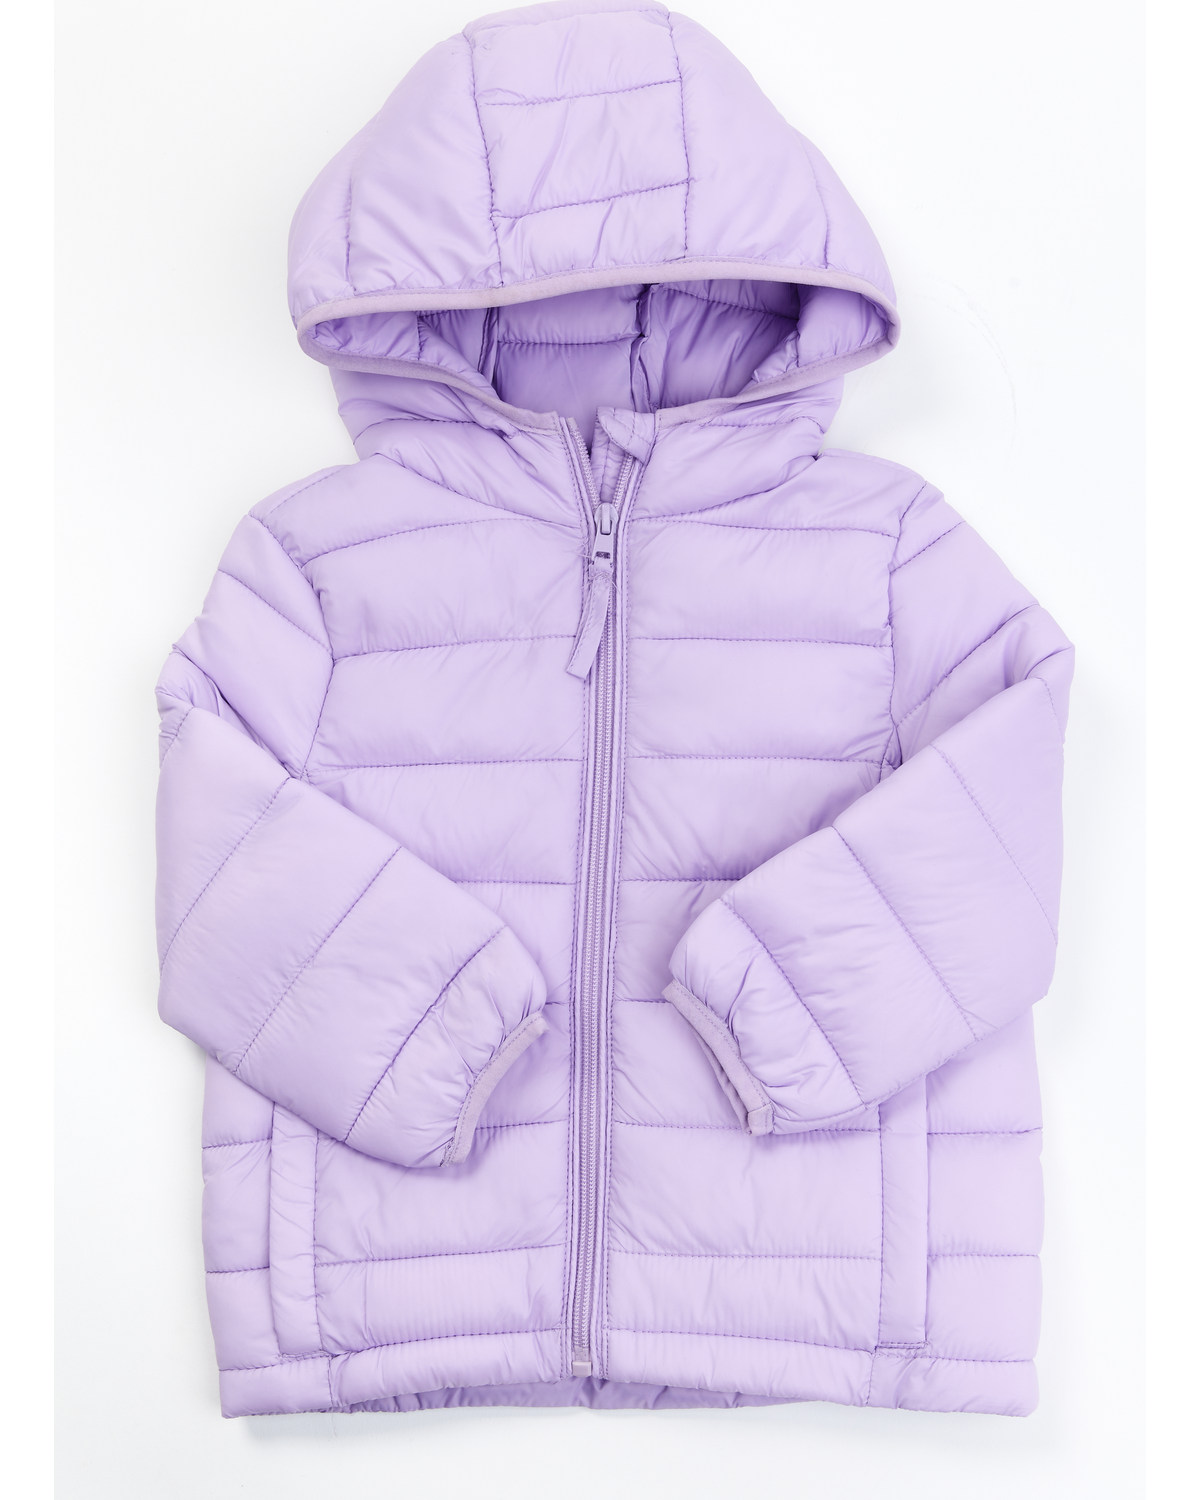 Urban Republic Youth Girls' Quilted Packable Puffer Hooded Jacket